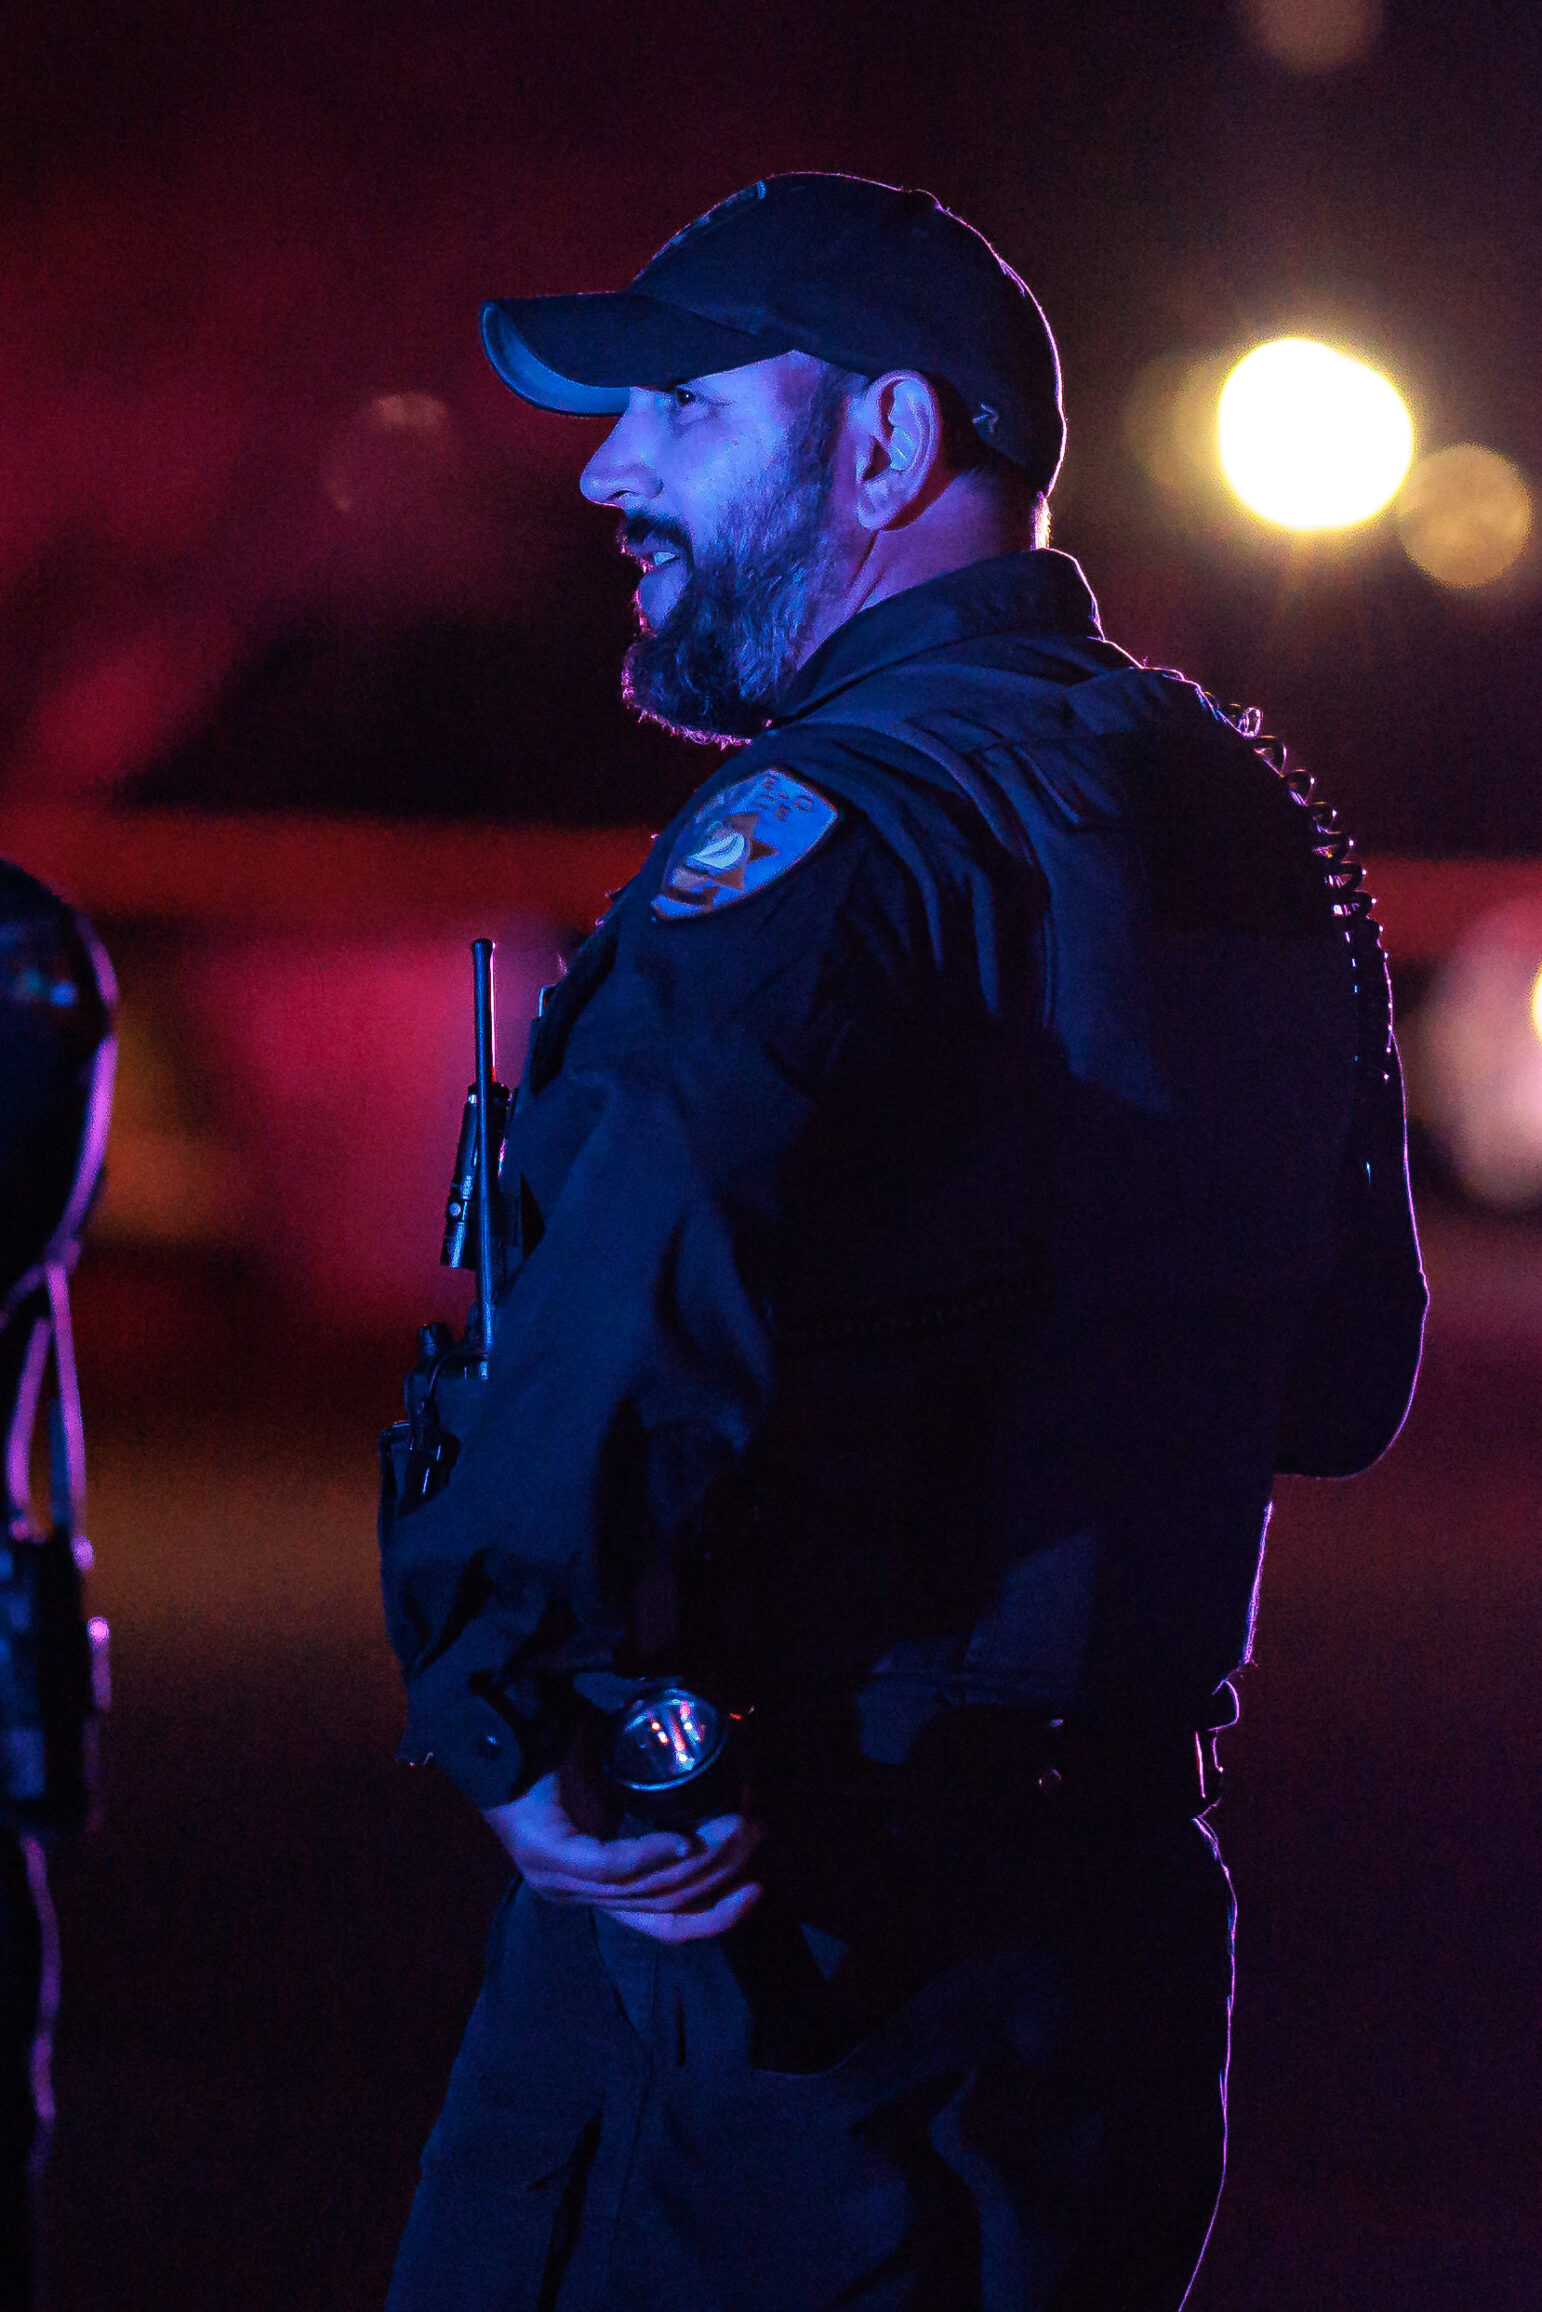 Photo of a police officer standing outdoors at night. The officer is in profile, looking to the left, with a beard and wearing a dark uniform with a badge and a radio. Red and blue police lights softly illuminate the background.